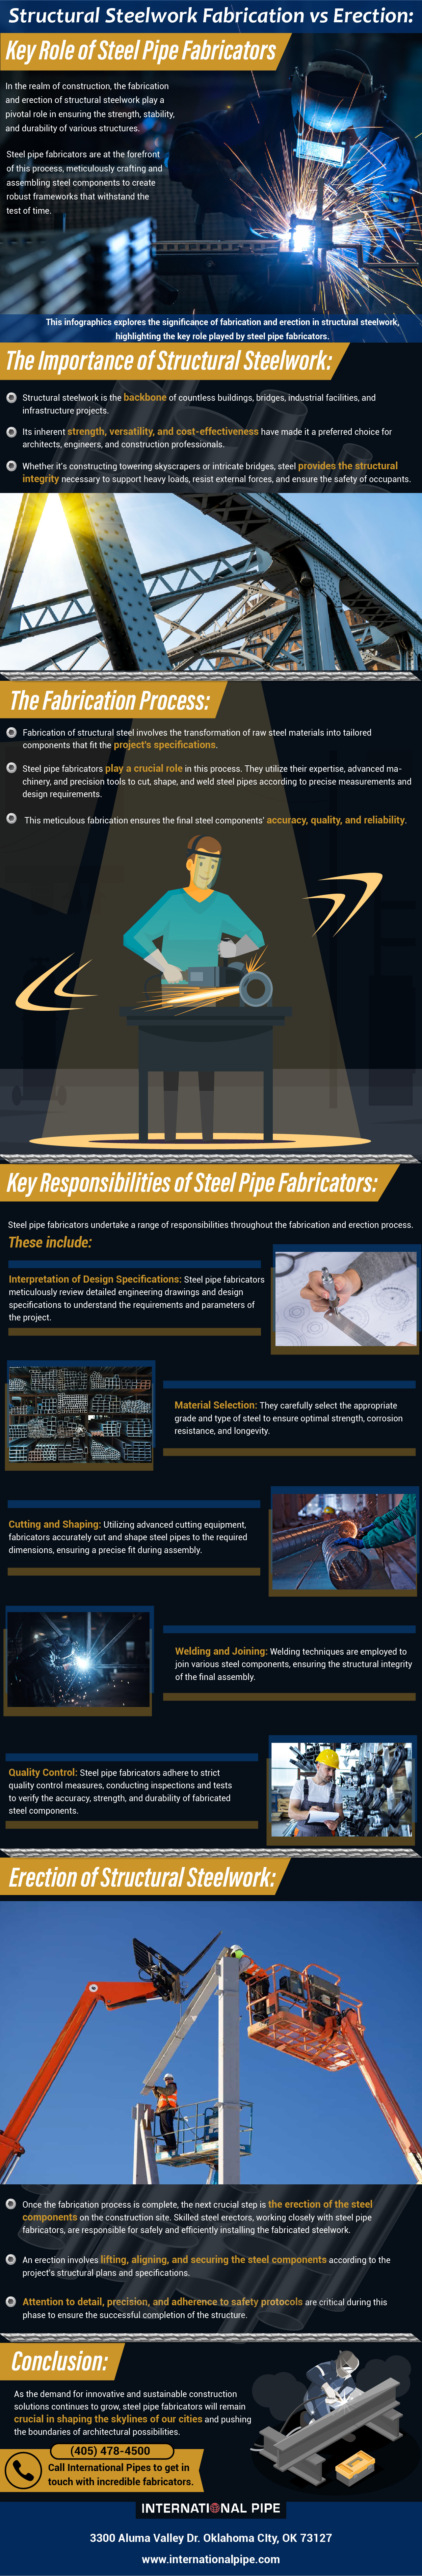 Structural Steelwork Fabrication vs Erection Key Role of Steel Pipe Fabricators